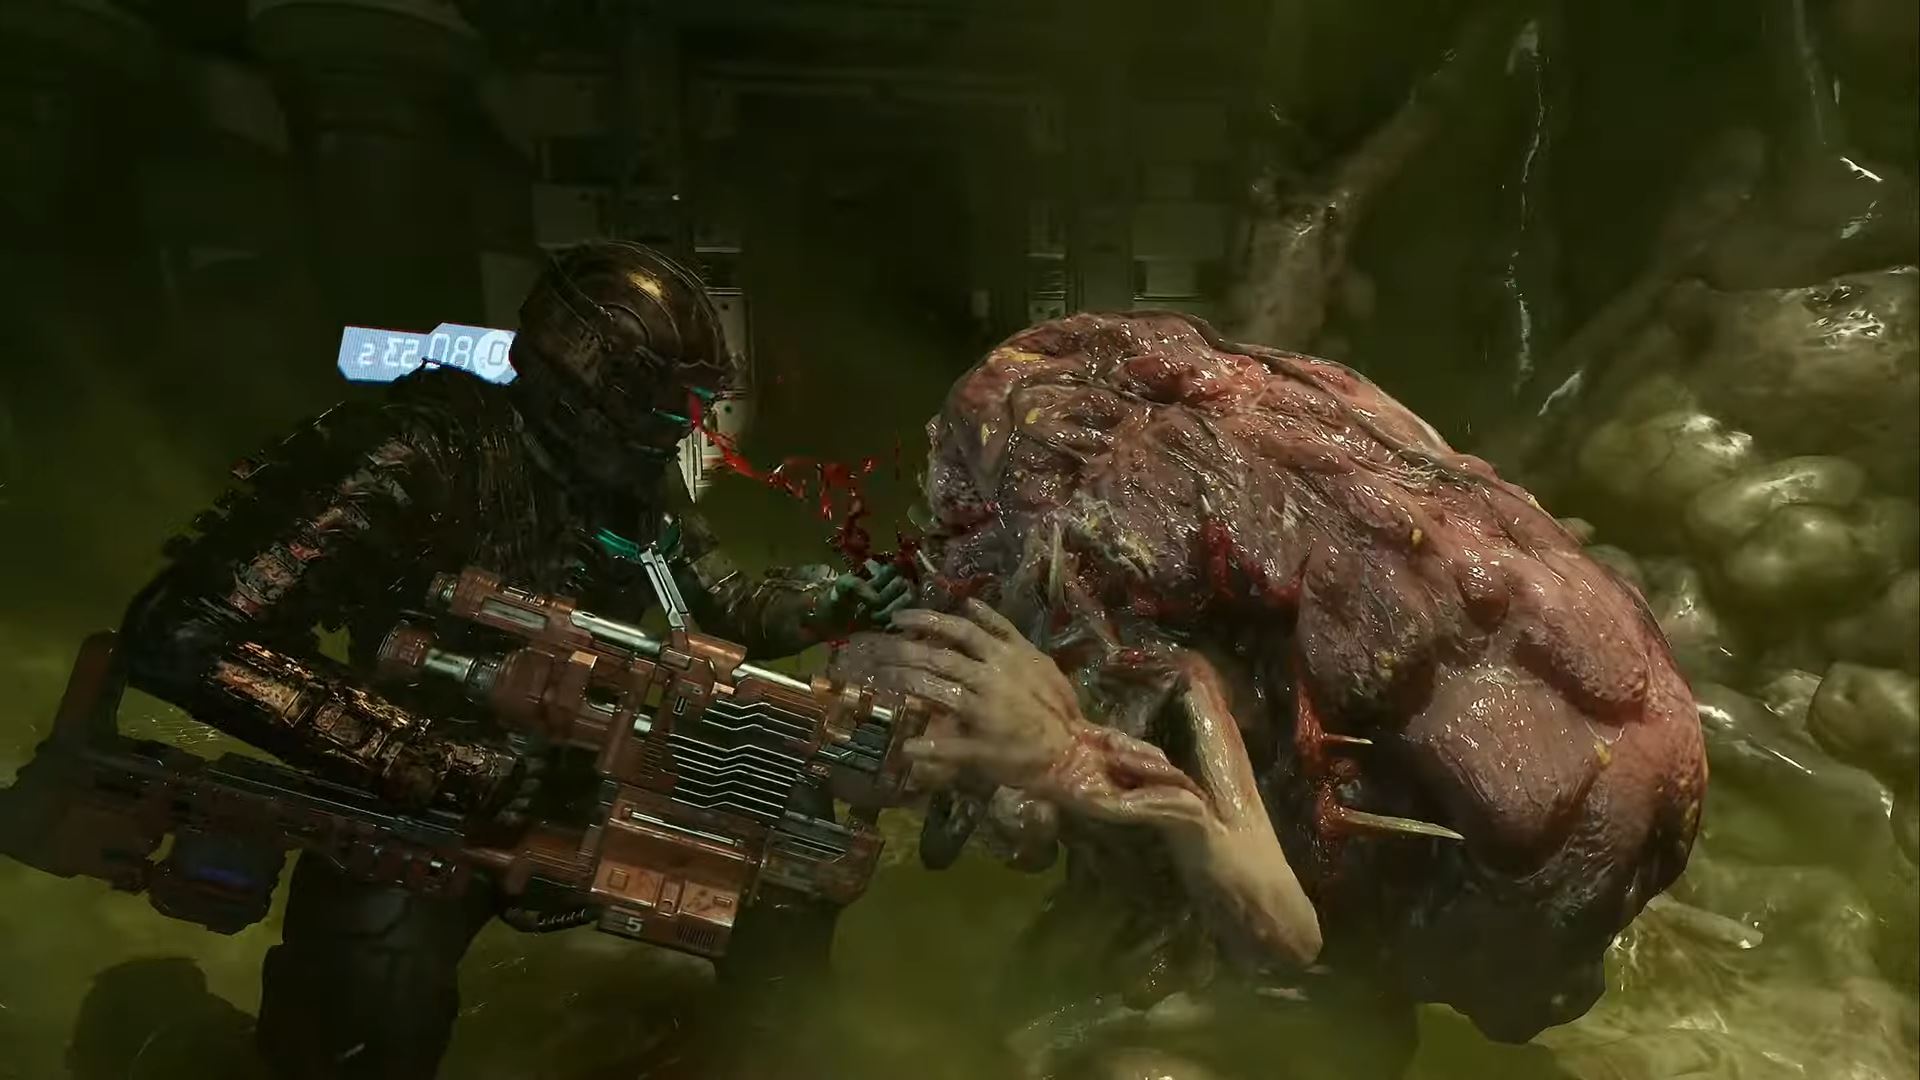 Dead space rig fallout 4 фото 29